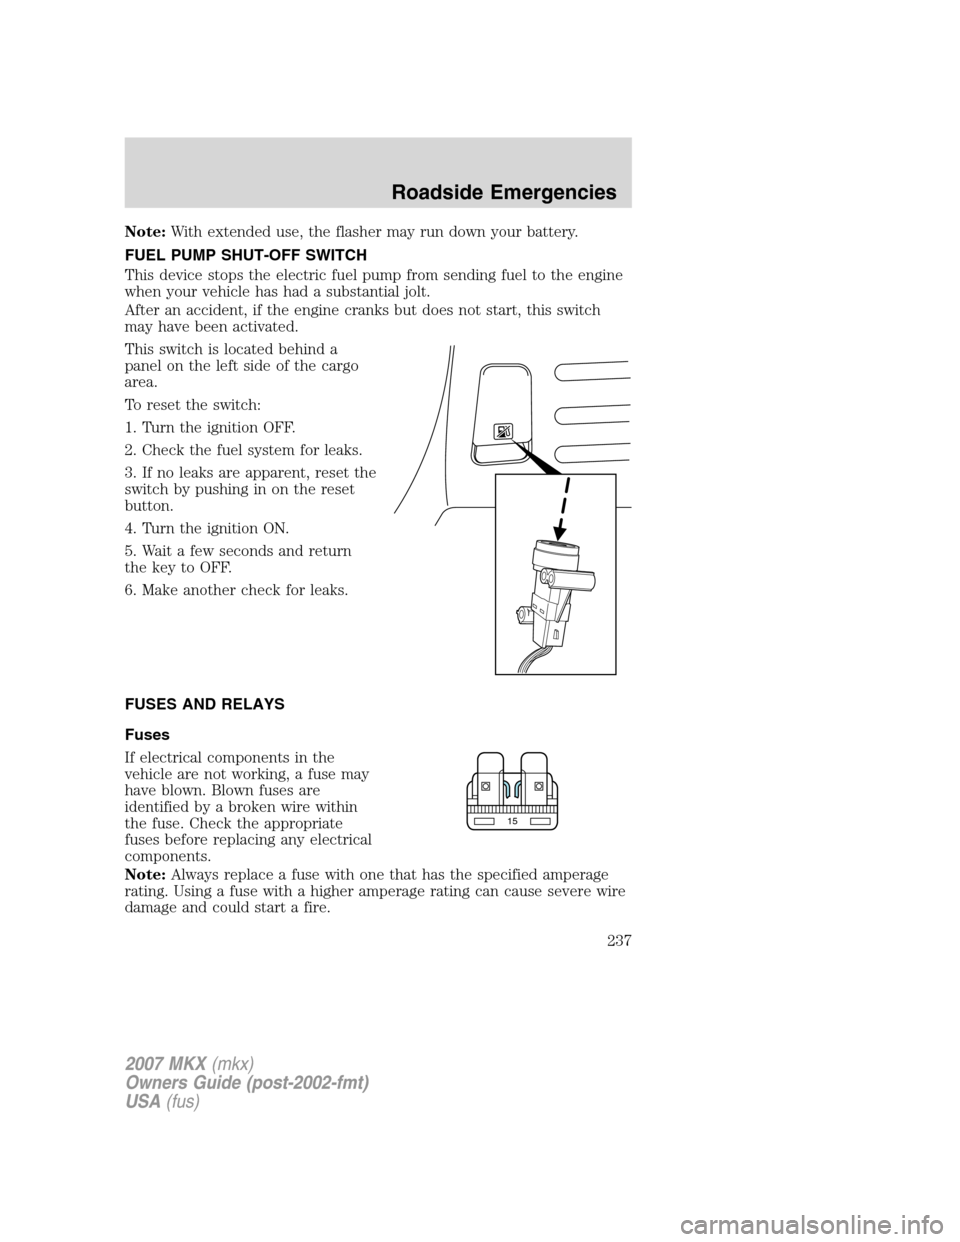 LINCOLN MKX 2007 User Guide Note:With extended use, the flasher may run down your battery.
FUEL PUMP SHUT-OFF SWITCH
This device stops the electric fuel pump from sending fuel to the engine
when your vehicle has had a substantia